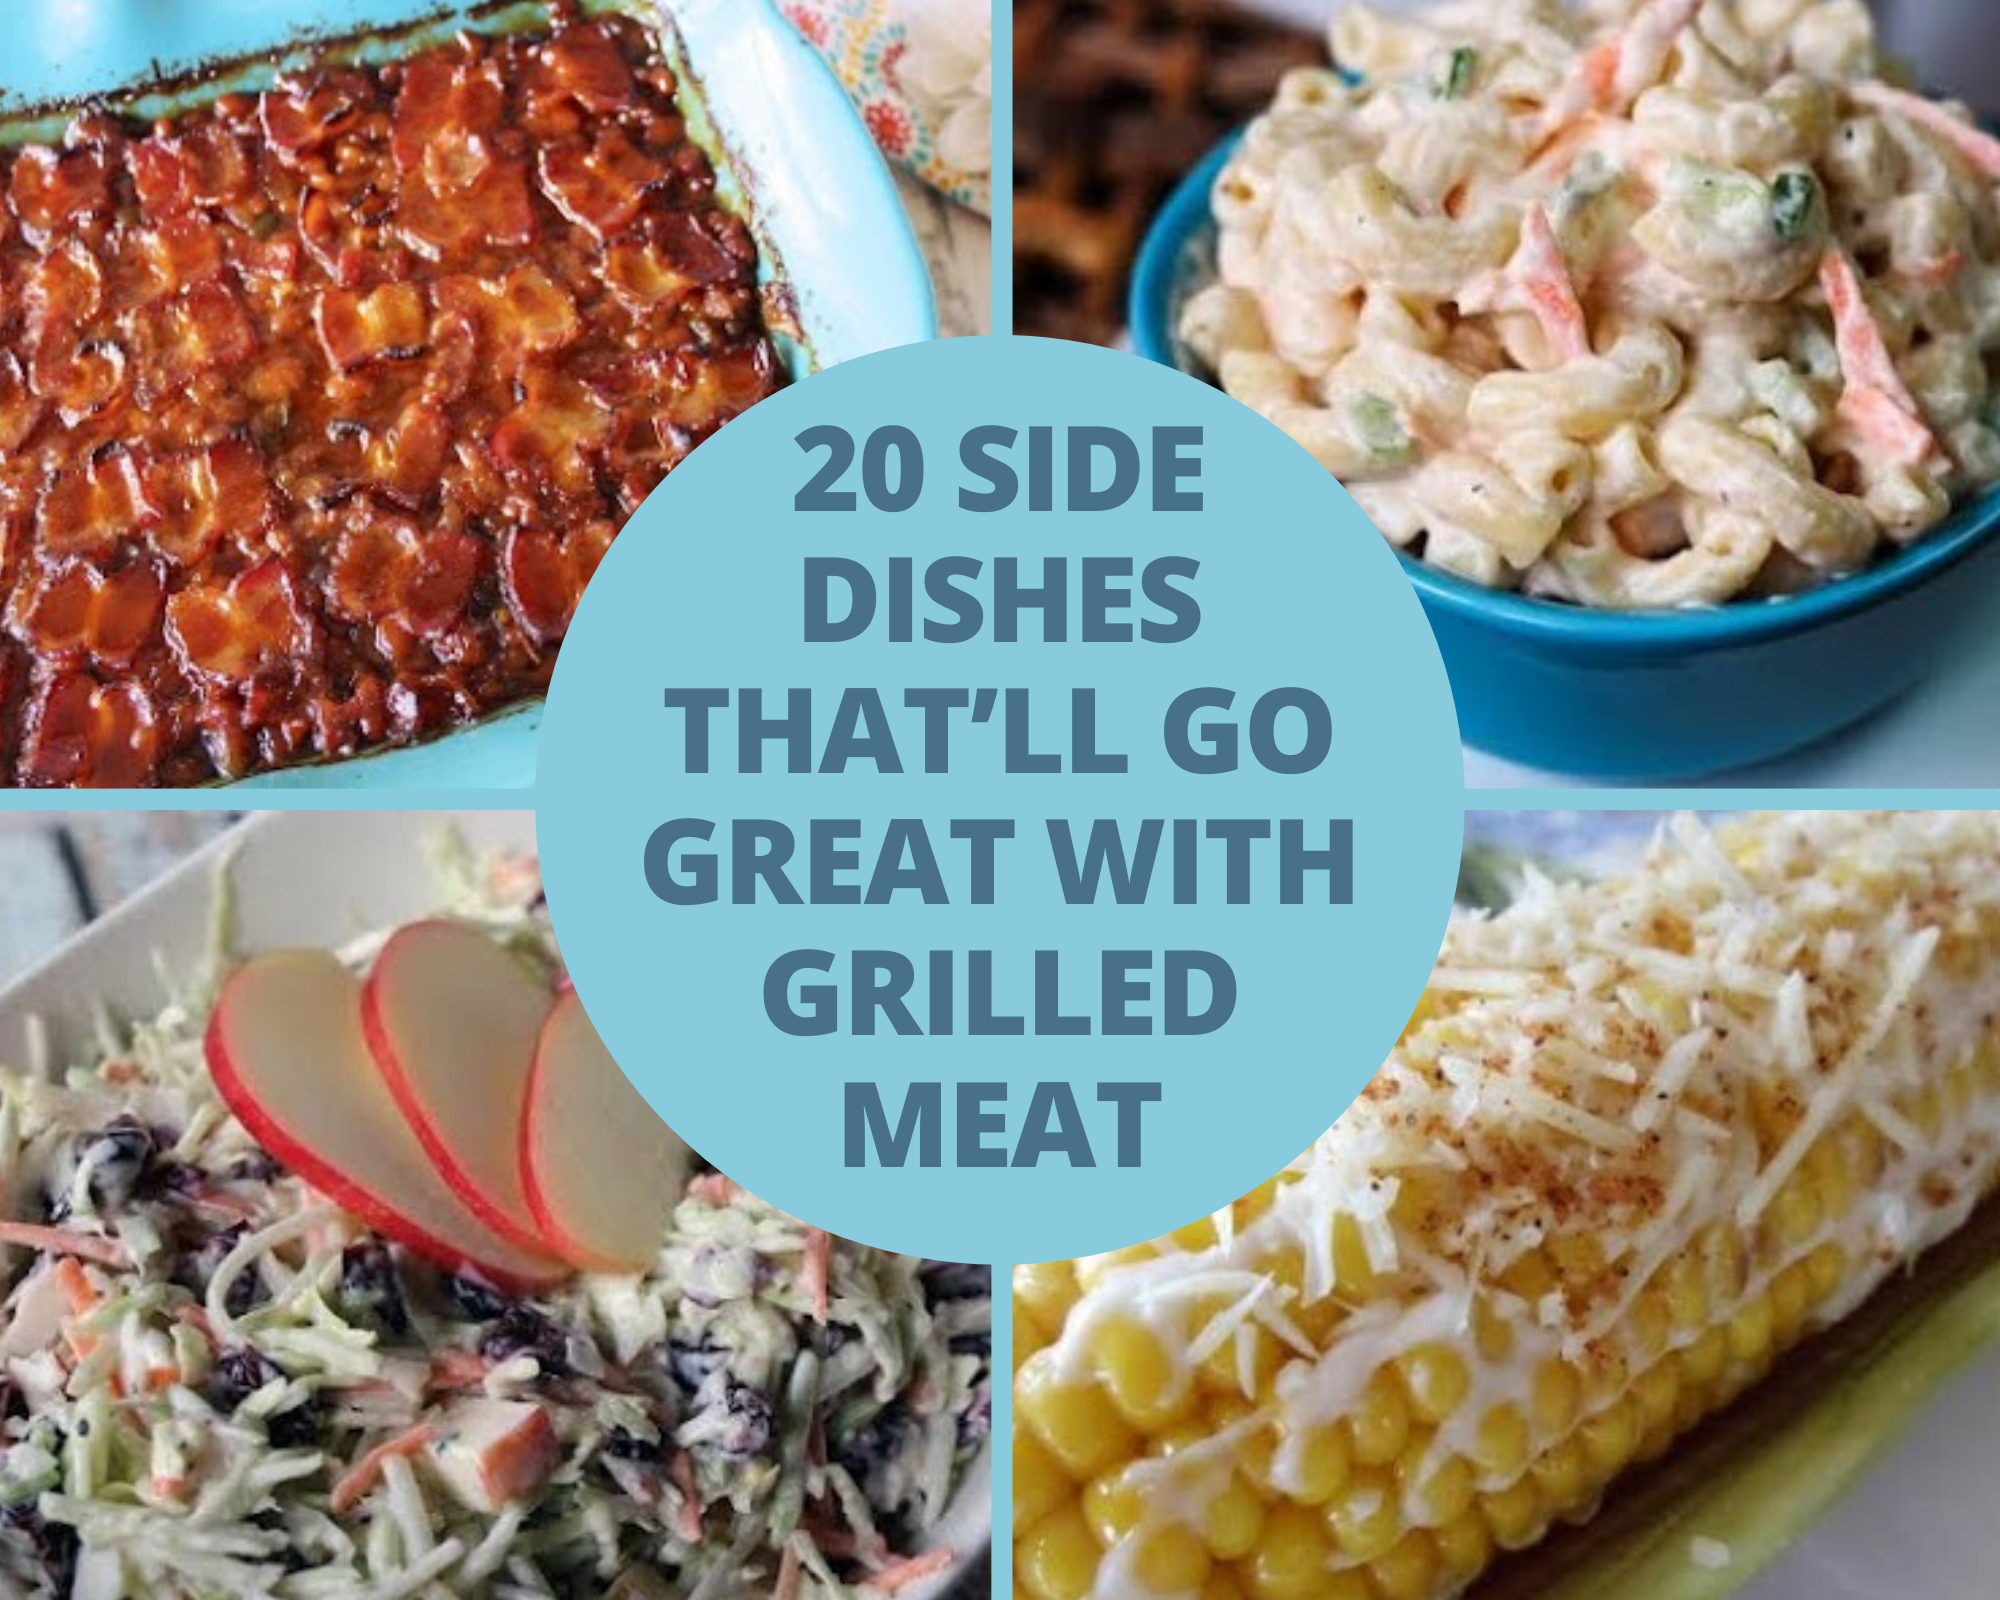 Baked beans, macaroni salad, coleslaw, corn on the cob and more!